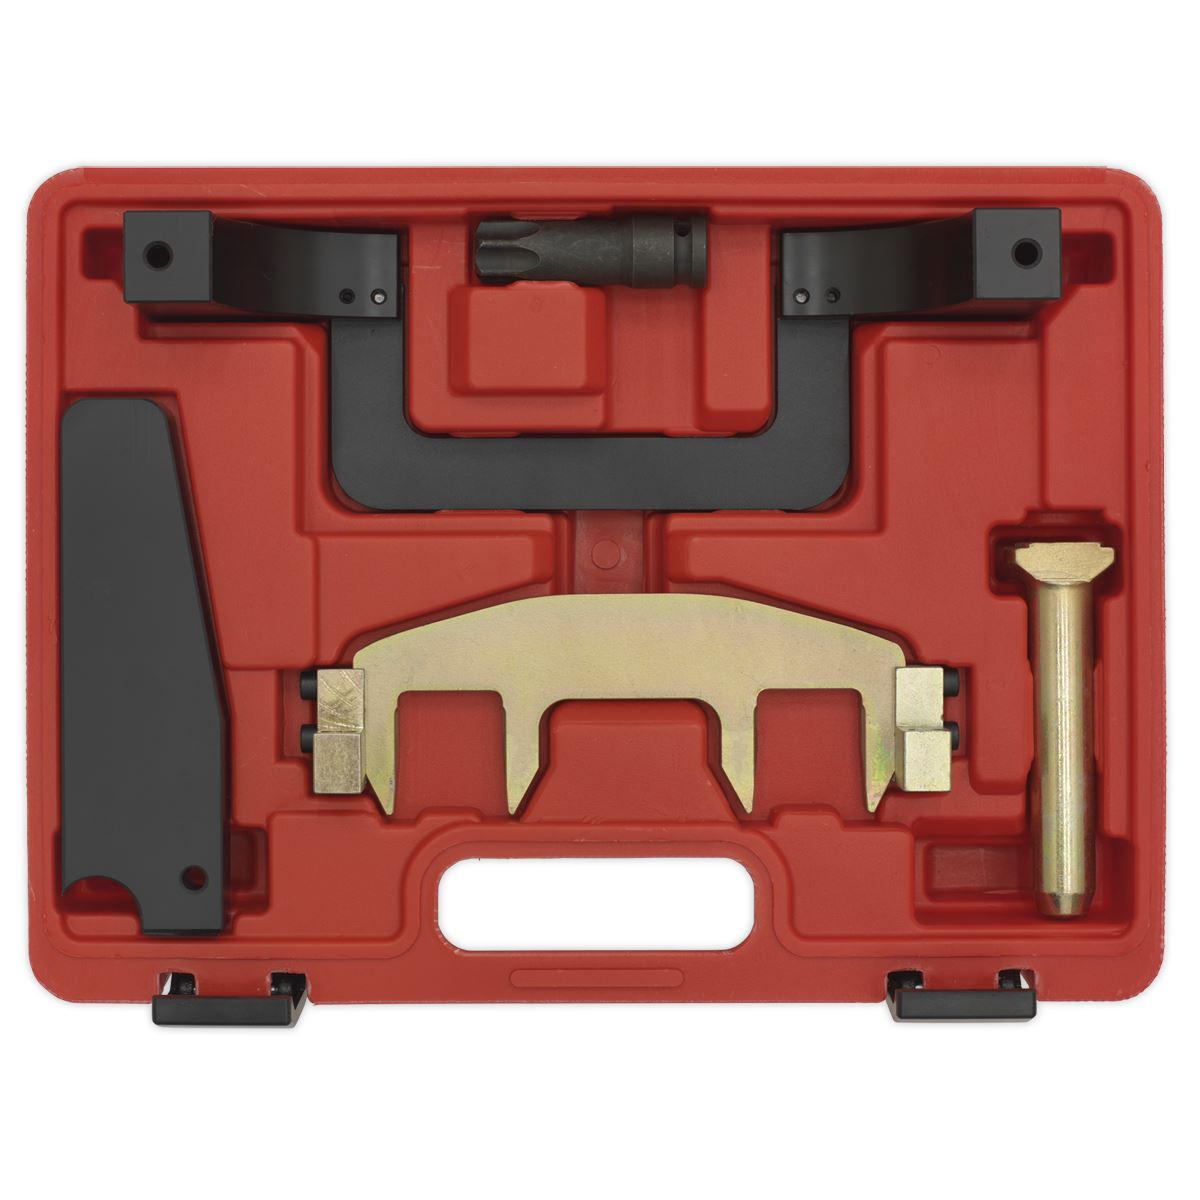 Sealey Petrol Engine Timing Tool Kit - for Mercedes 1.6/1.8 M271 - Chain Drive